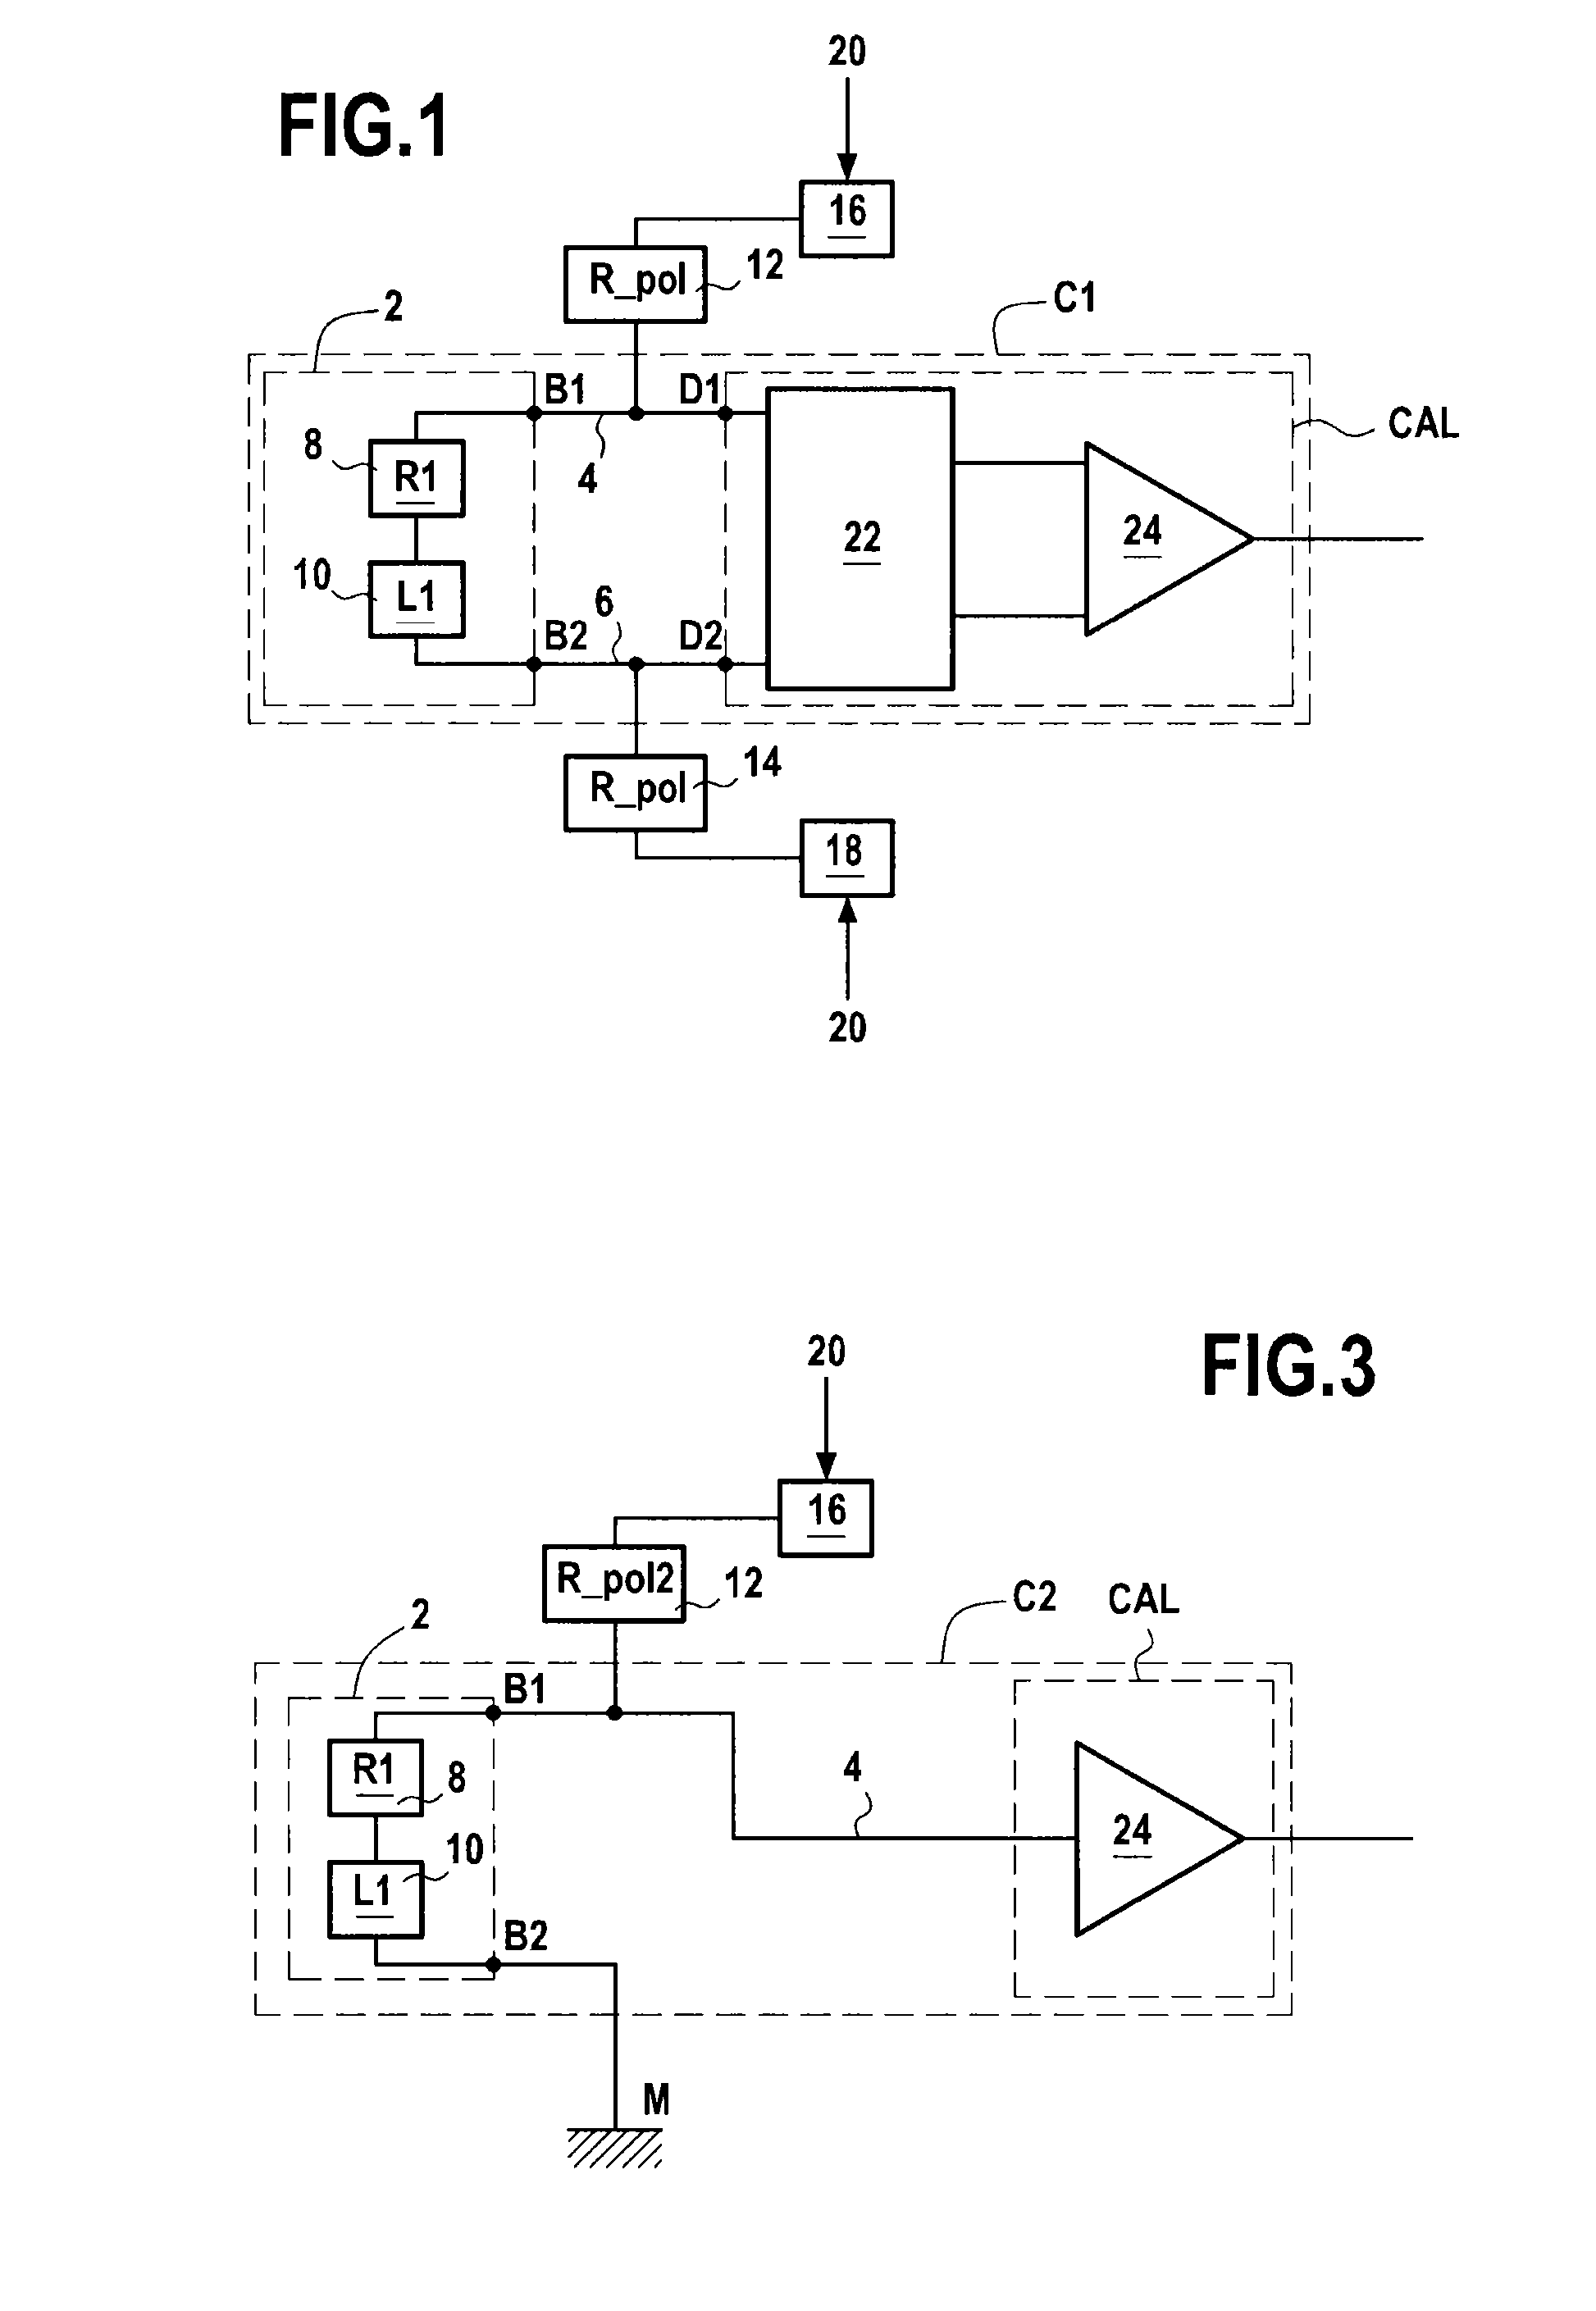 Method for correcting the voltage measured across the terminals of a sensor